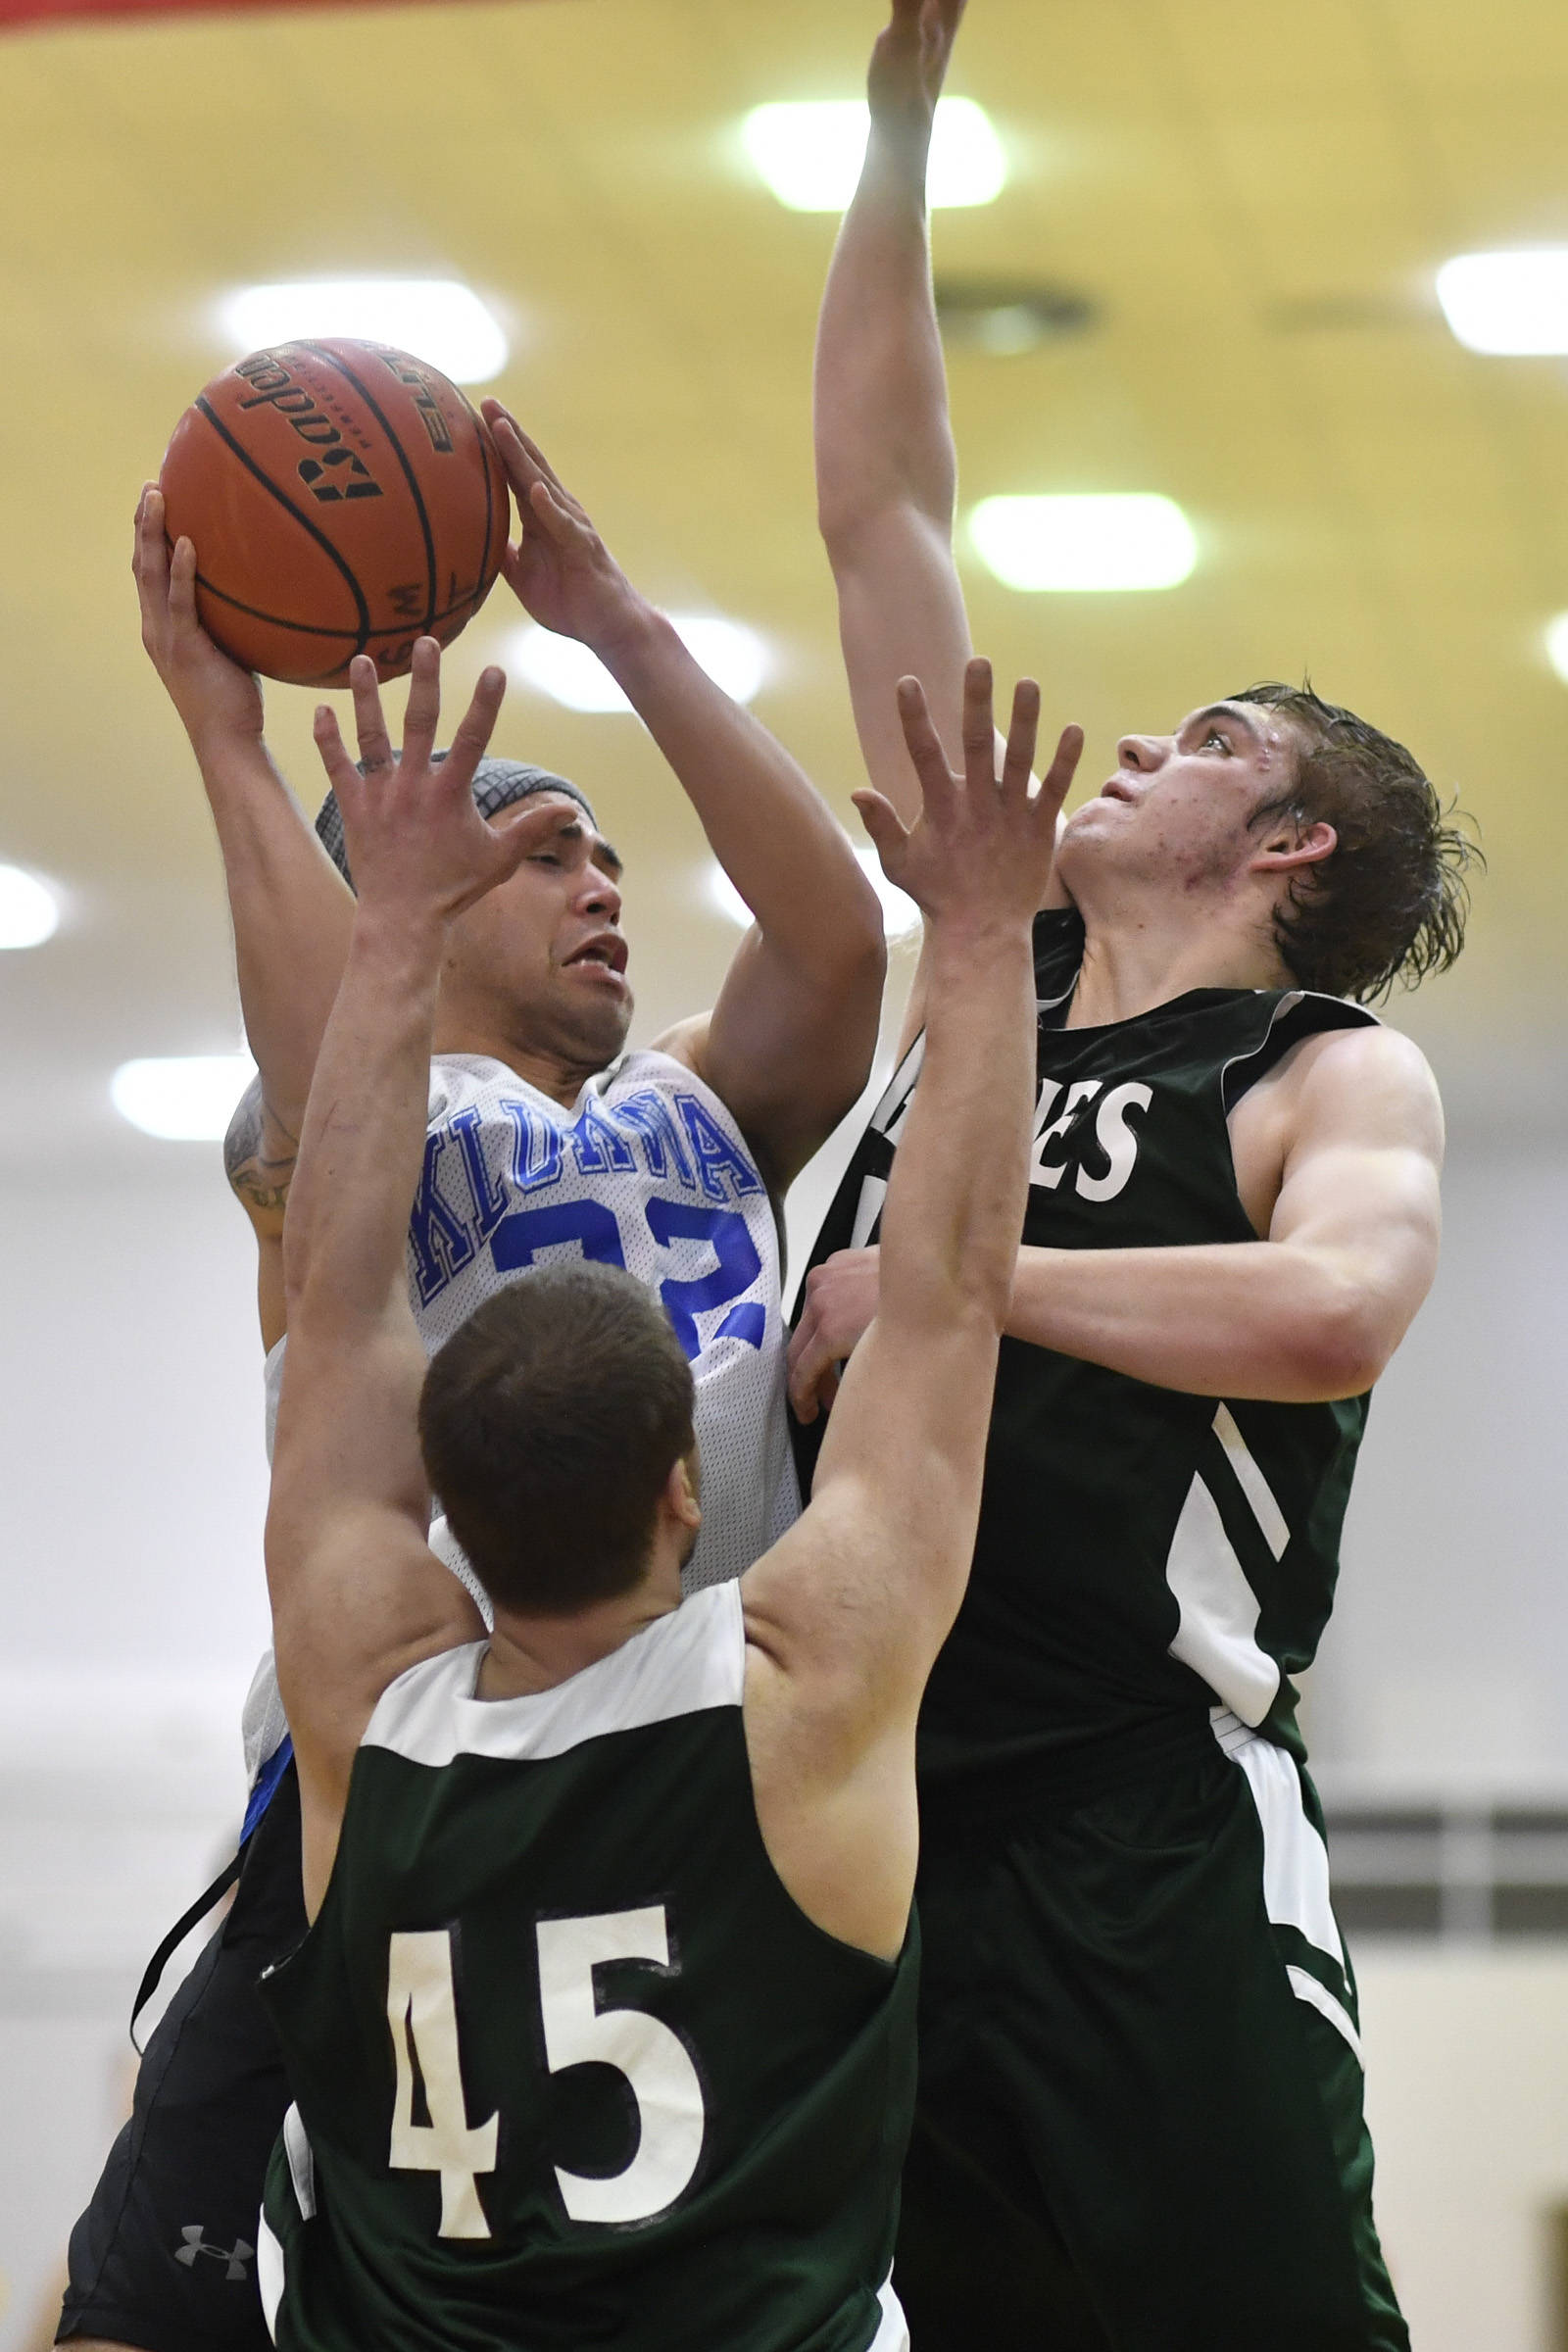 Klukwan’s Terrance Wheat is blocked from shooting by Haines’ Dylon Swinton, right, and Brian Combs in a B bracket game at the Juneau Lions Club 73rd Annual Gold Medal Basketball Tournament at Juneau-Douglas High School: Yadaa.at Kalé on Tuesday, March 19, 2019. Haines won 97-51. (Michael Penn | Juneau Empire)